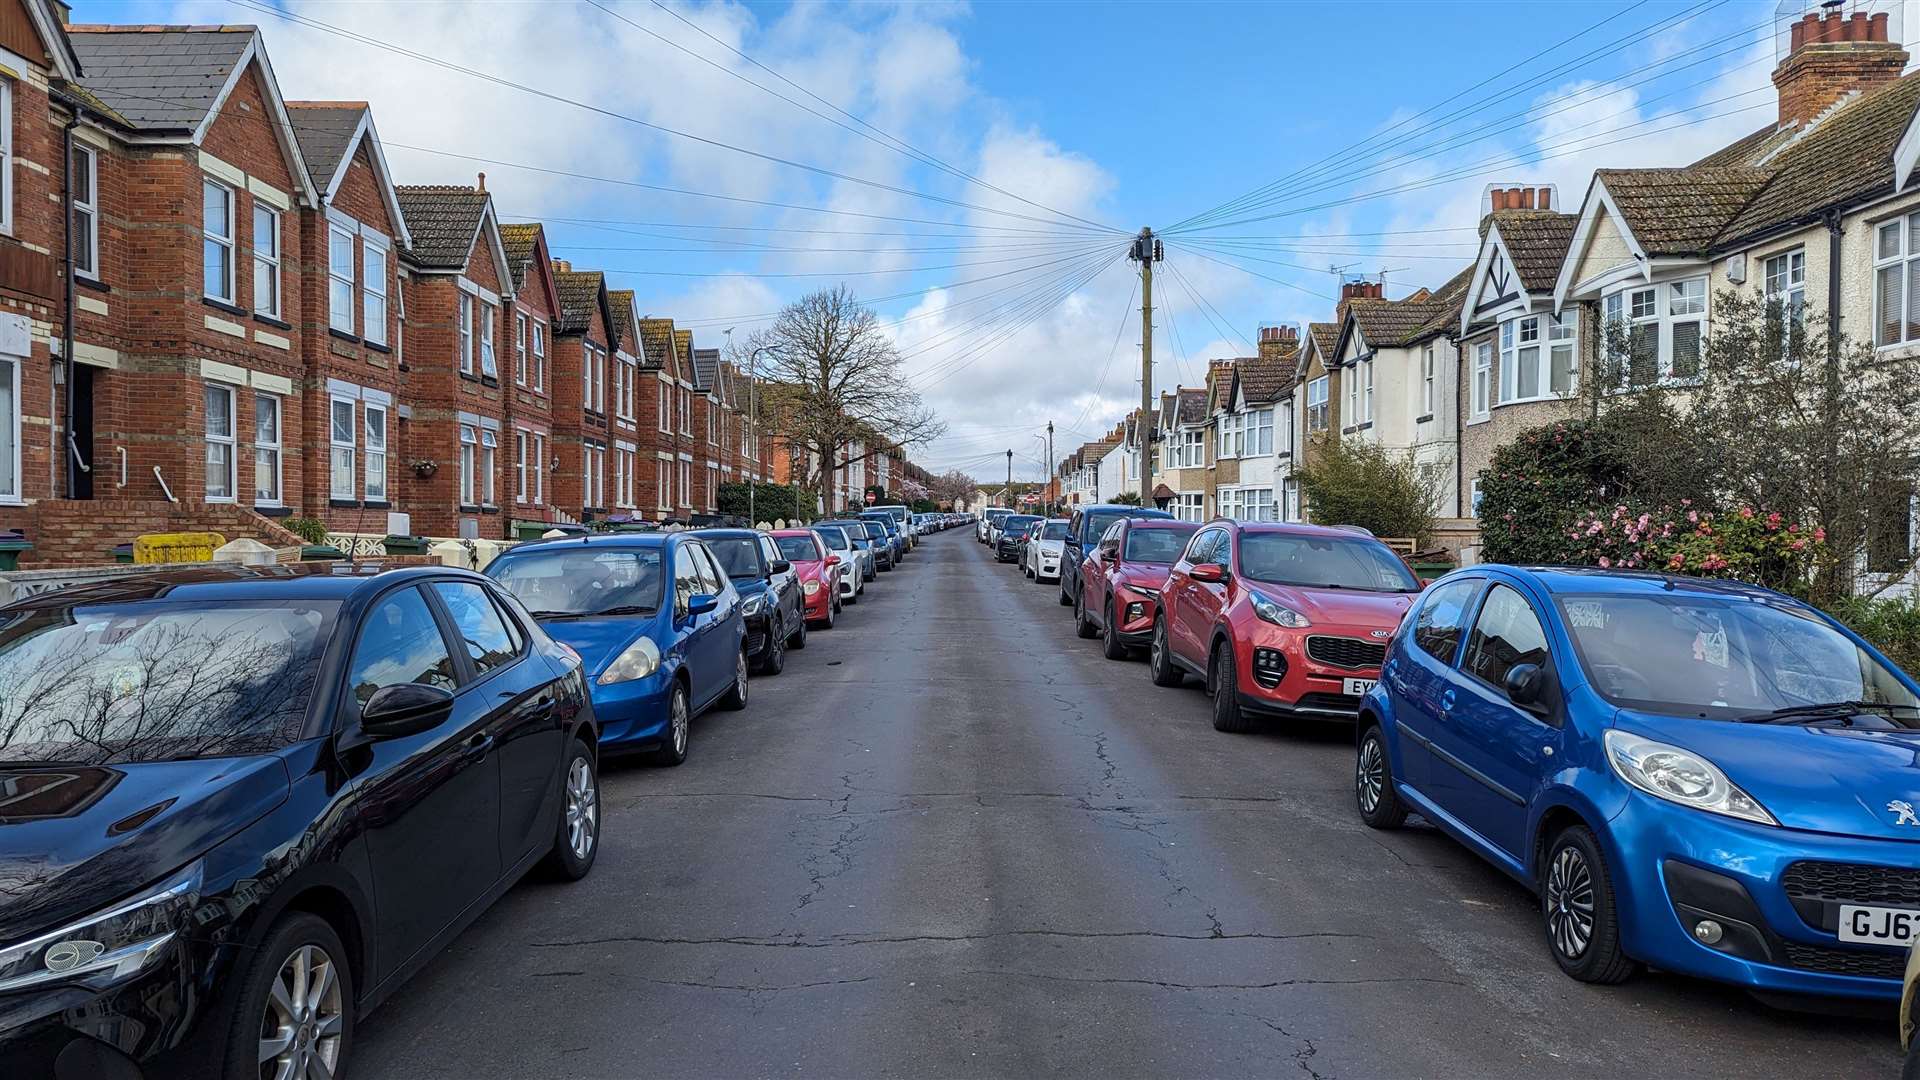 Chart Road is one of the residential streets where the CPZ could be introduced